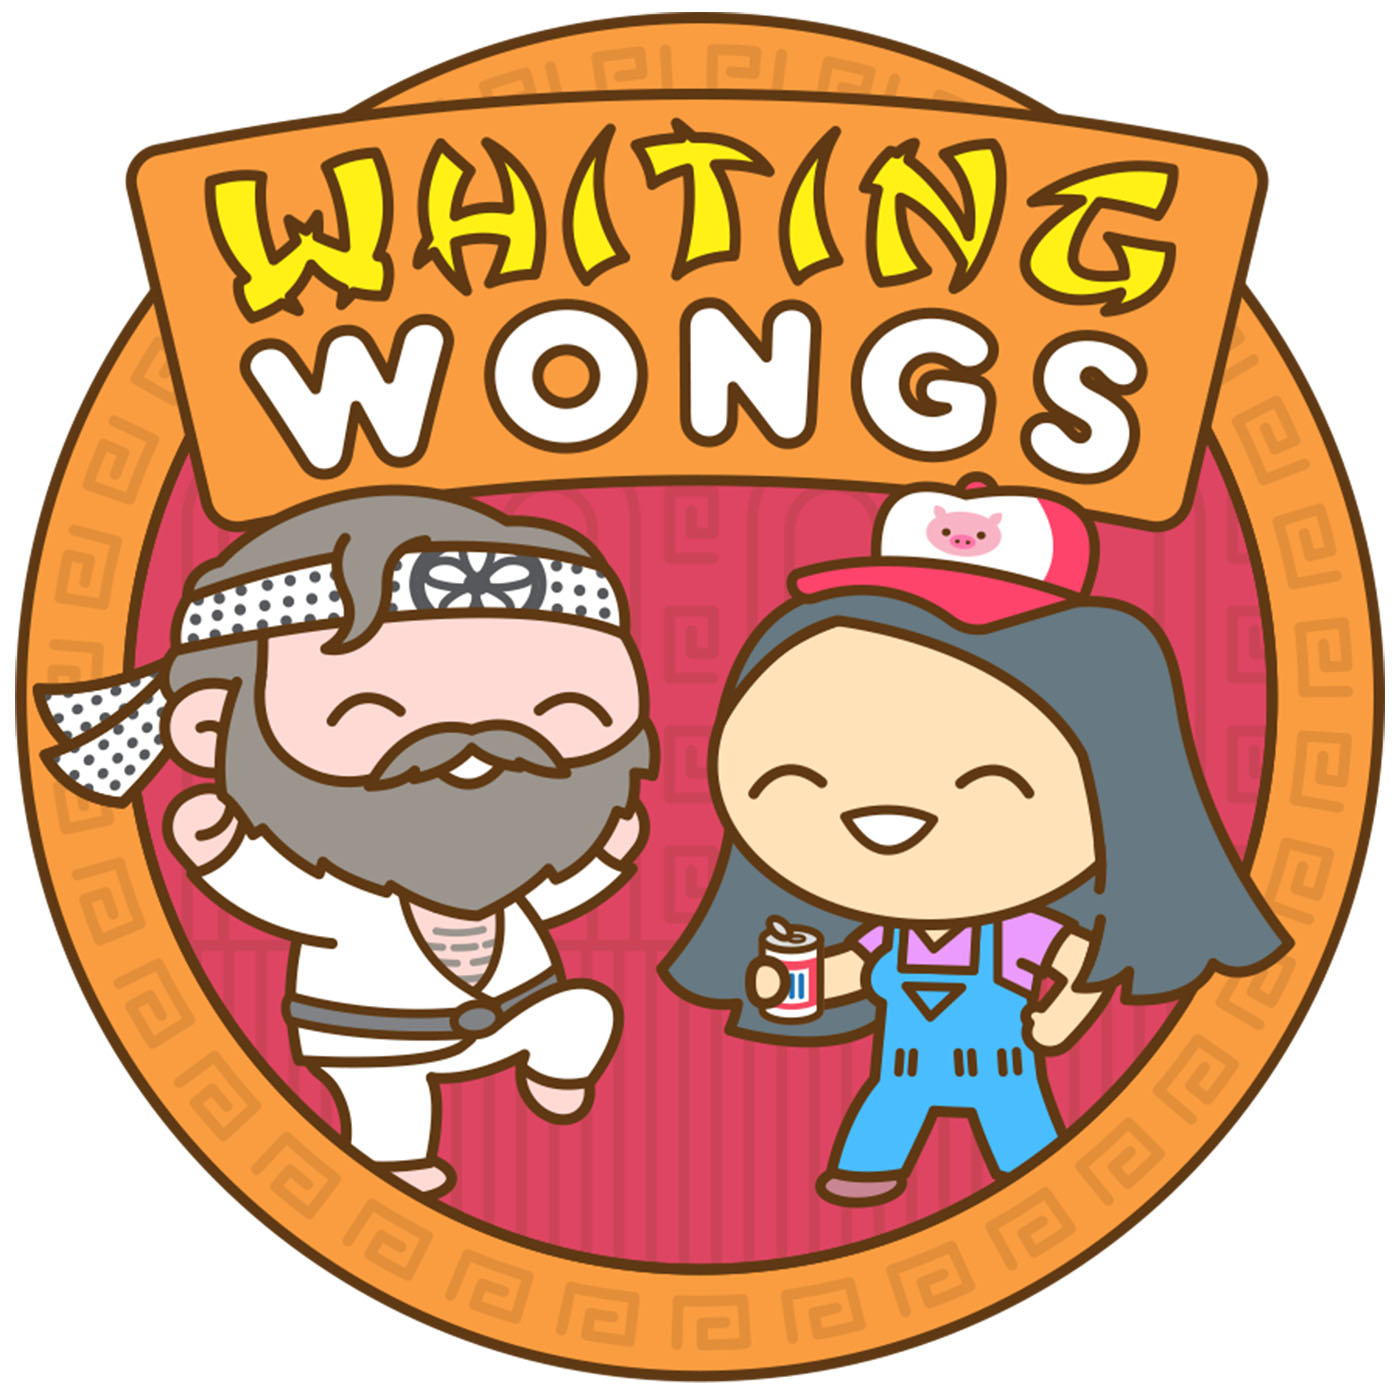 Whiting Wongs Podcast Cover - Square